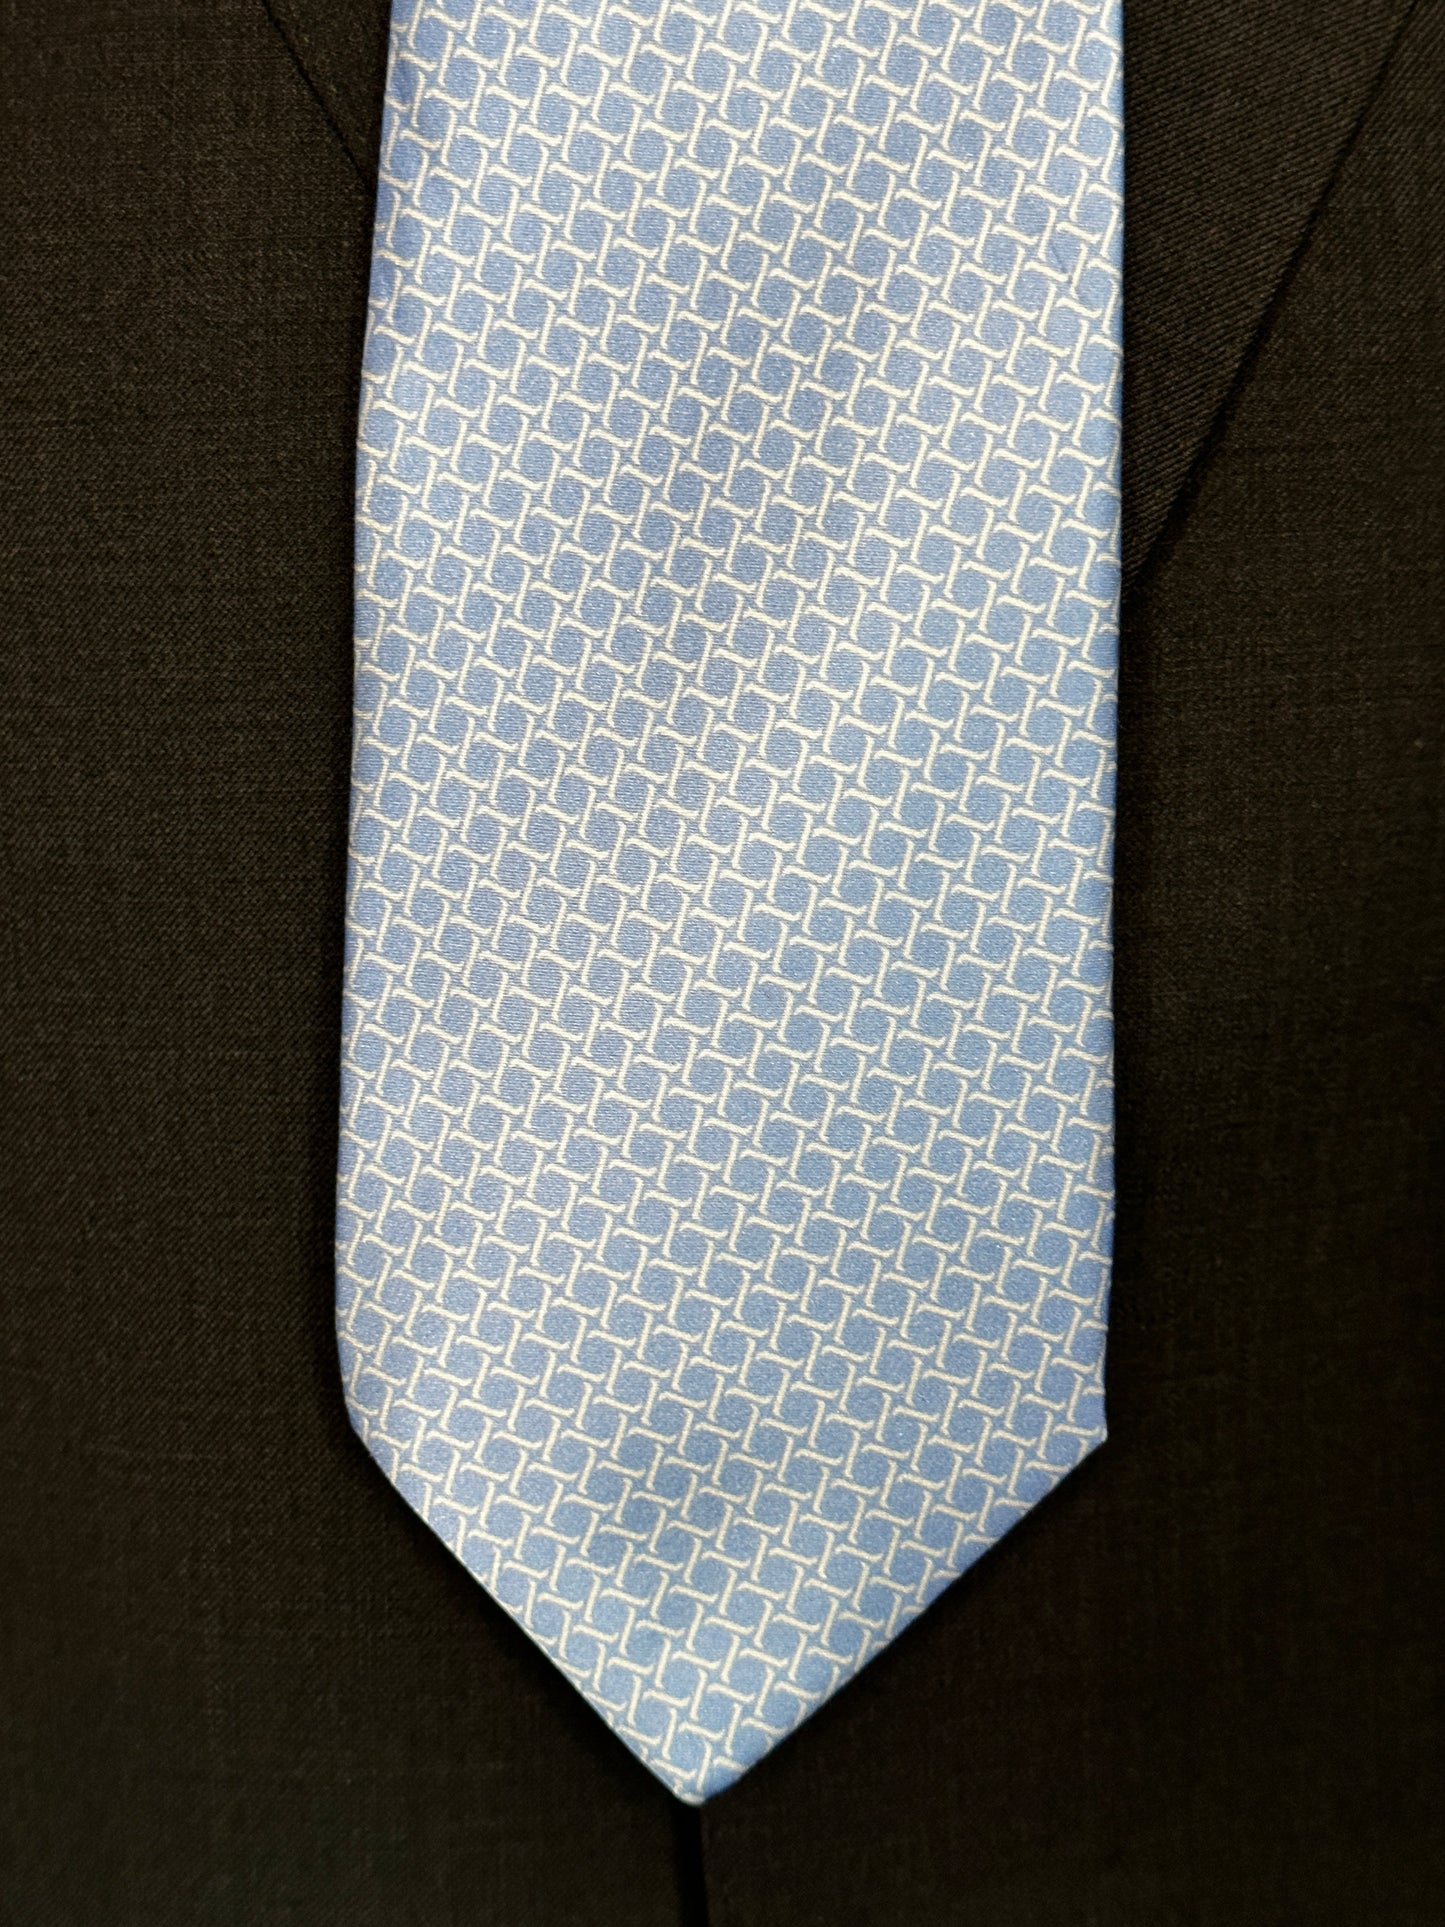 This satin finish 100% silk necktie has a very interesting all over geometric pattern of interlocking white links almost chain link in style. The silk is very smooth to the touch and has a natural luster that shines in certain light. This is a serious tie. Great for those business meetings, court dates, daytime or evening events, and all around more formal attire. This is best paired with a fancy white or tone on tone white dress shirt.